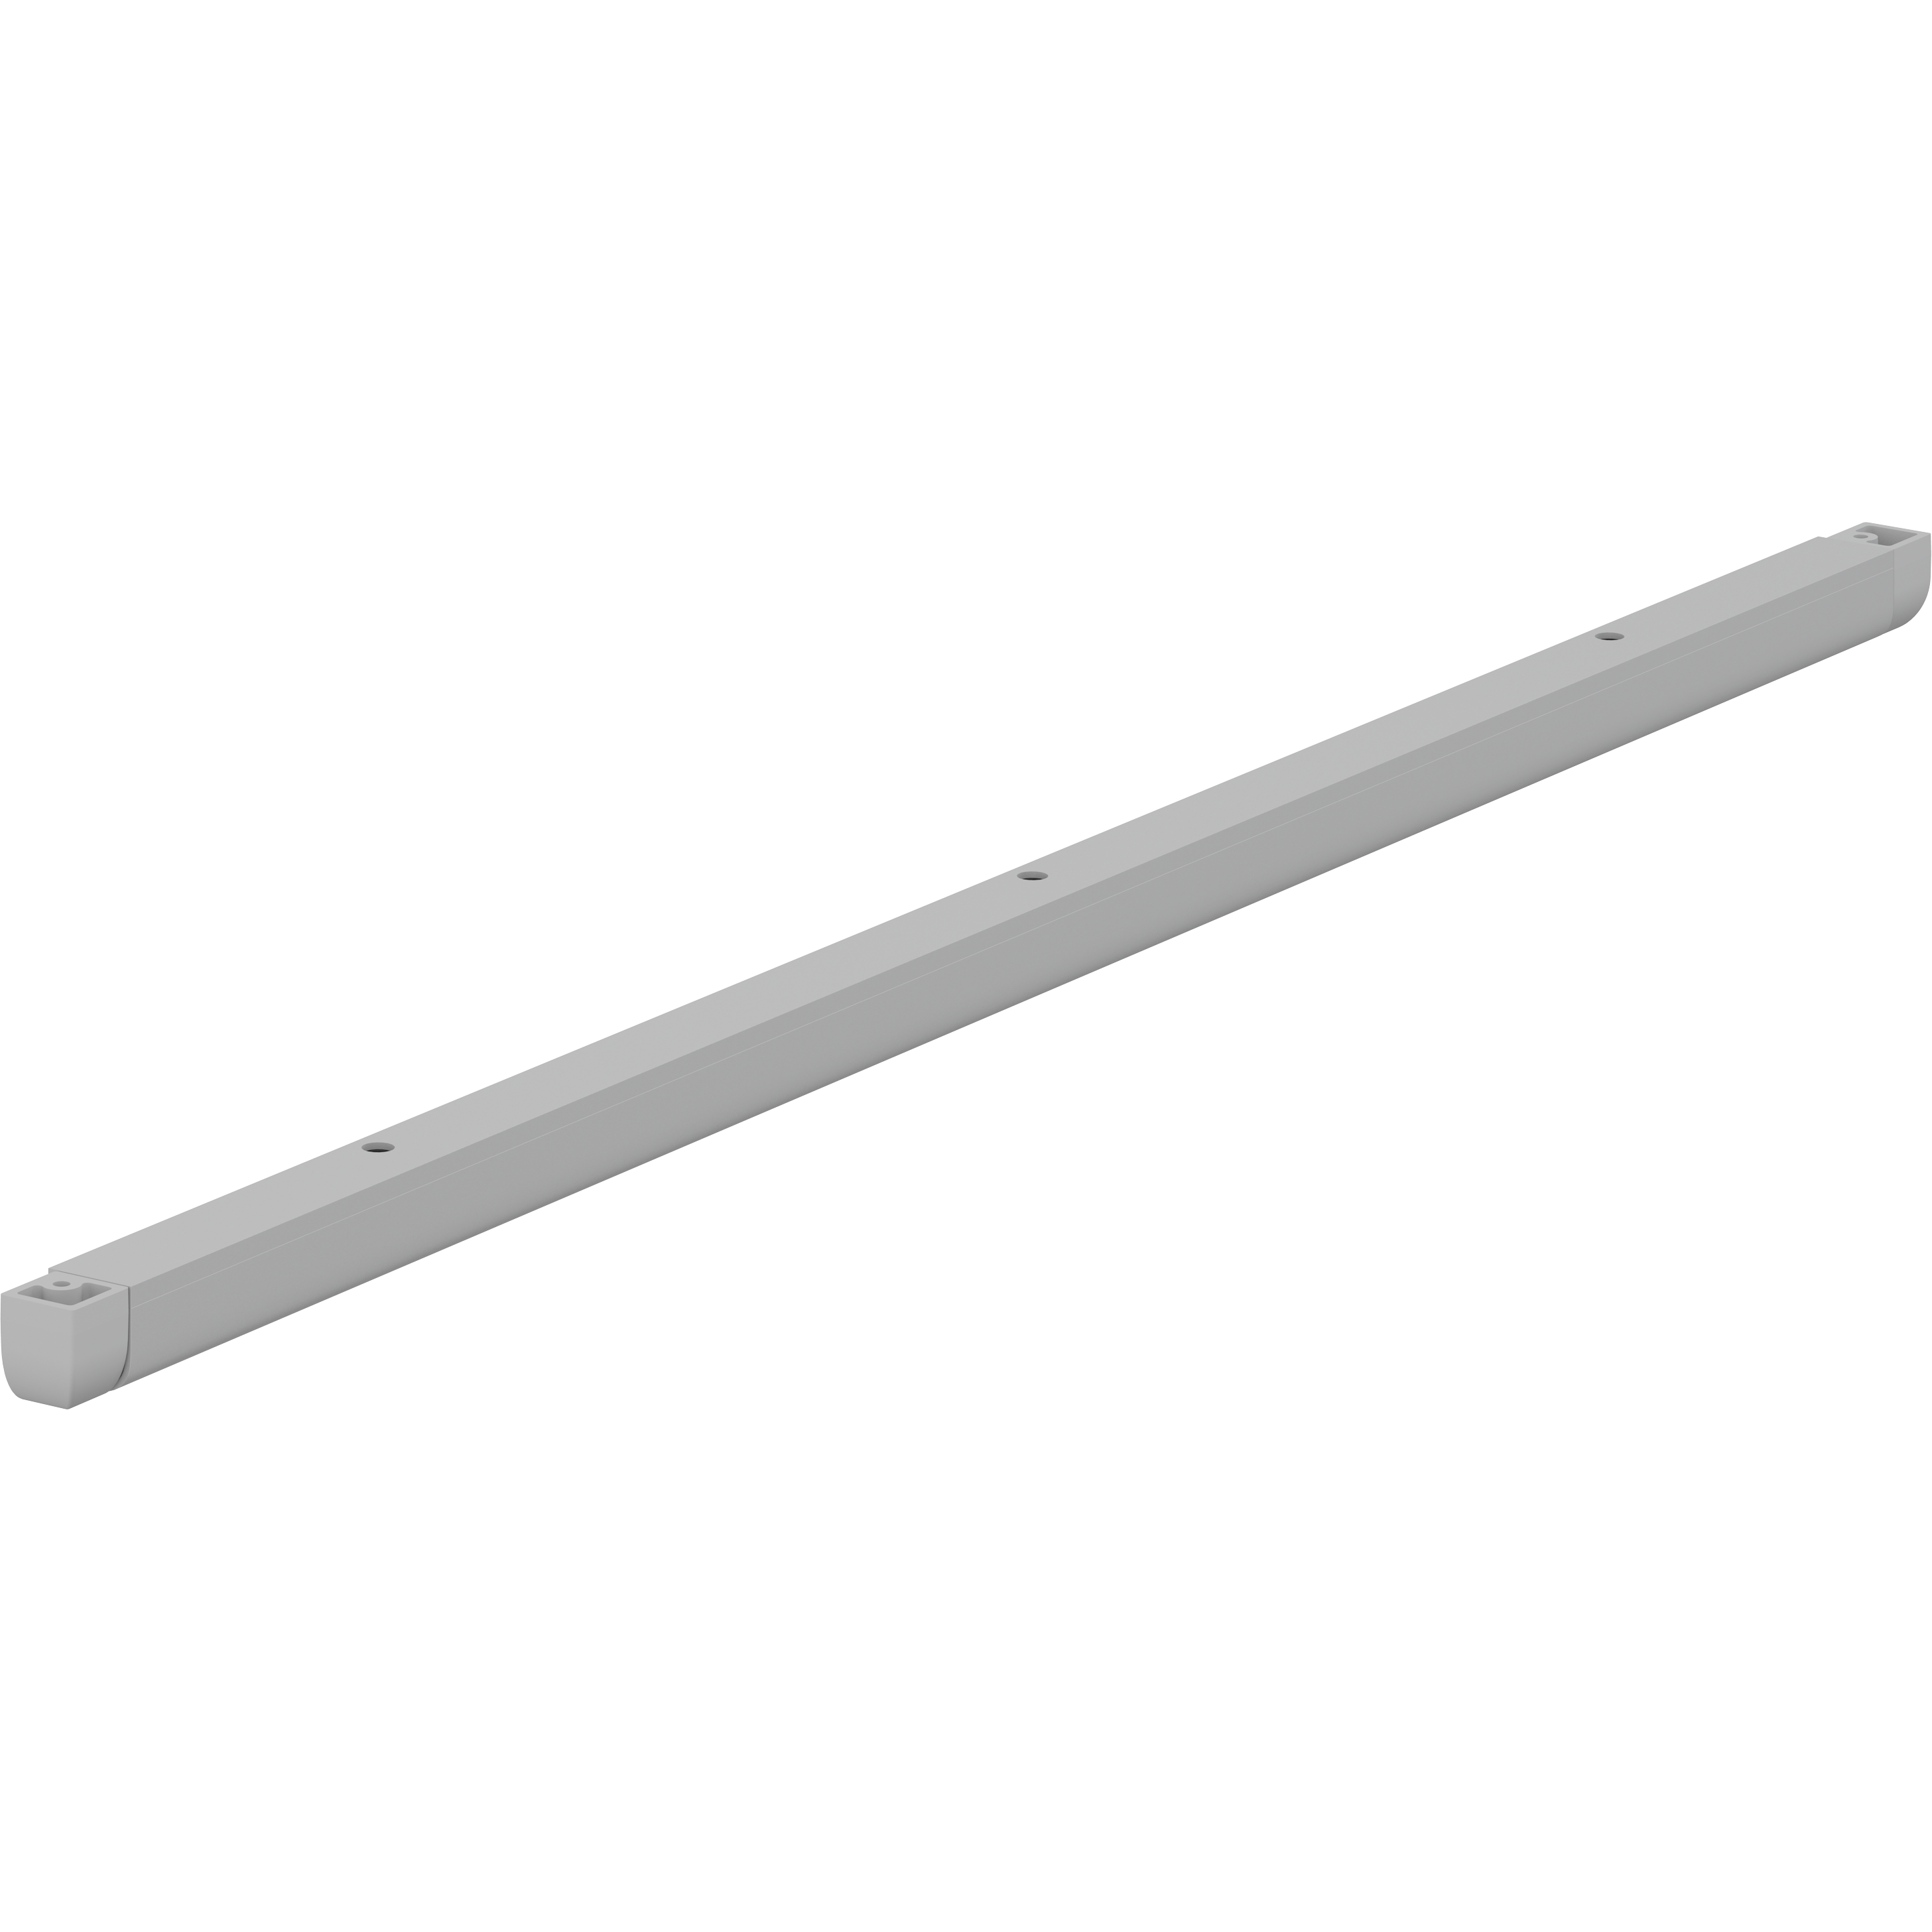 Safety rail for worktop, length from 1001 to 1400 mm